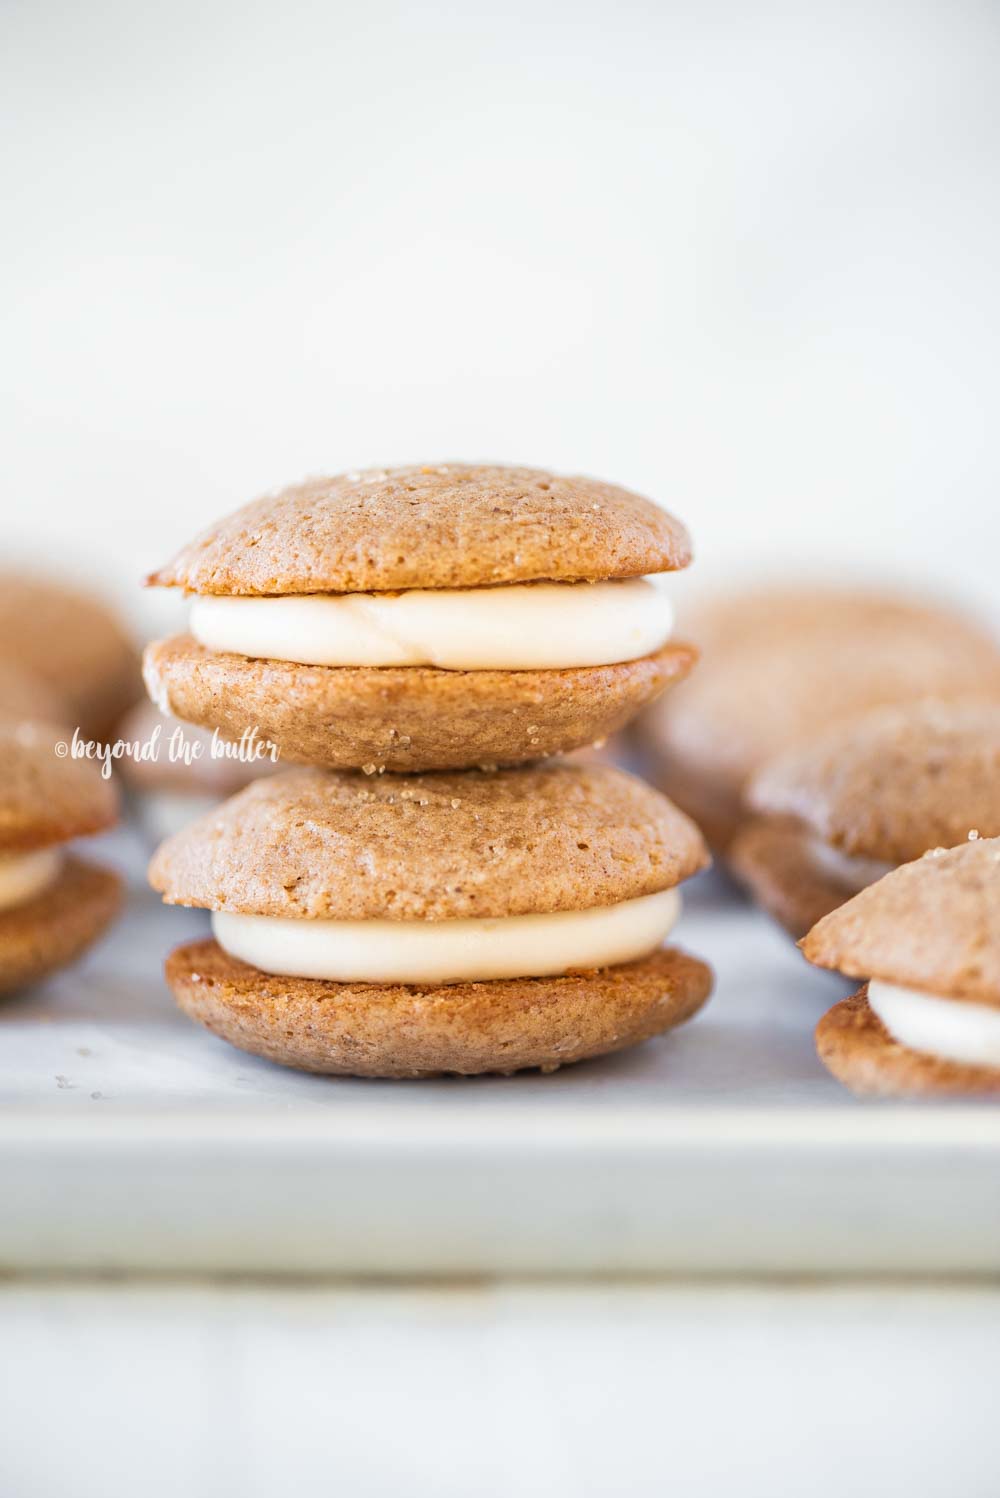 Apple Cider Whoopie Pies with Caramel Cream Cheese Frosting | All Images © Beyond the Butter, LLC